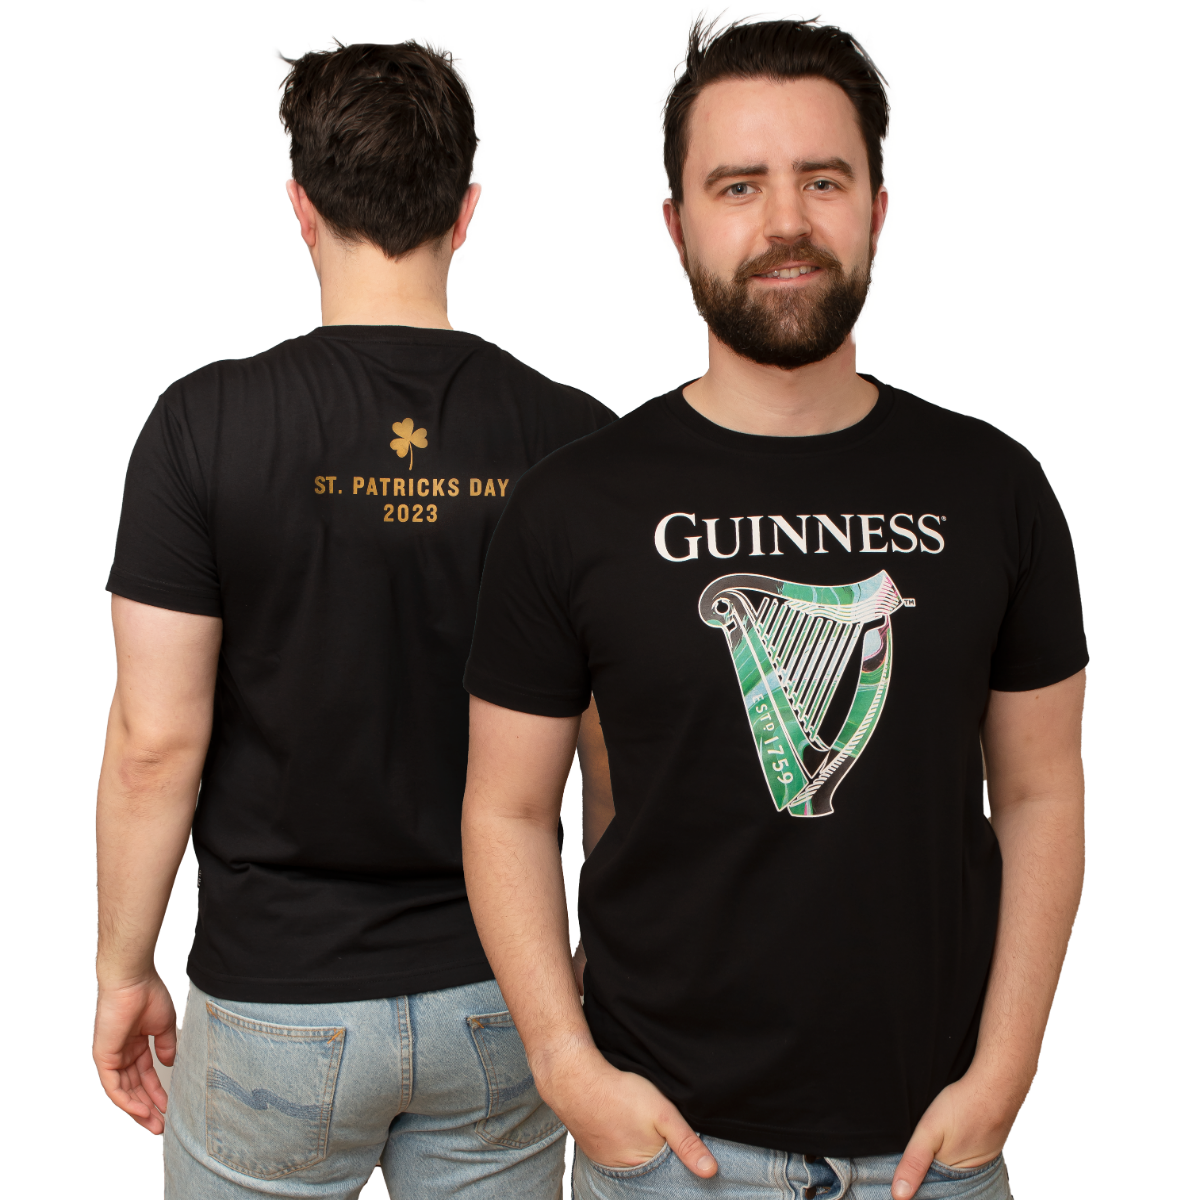 Guinness Limited Edition St Patrick's Day 2023 Black Tee